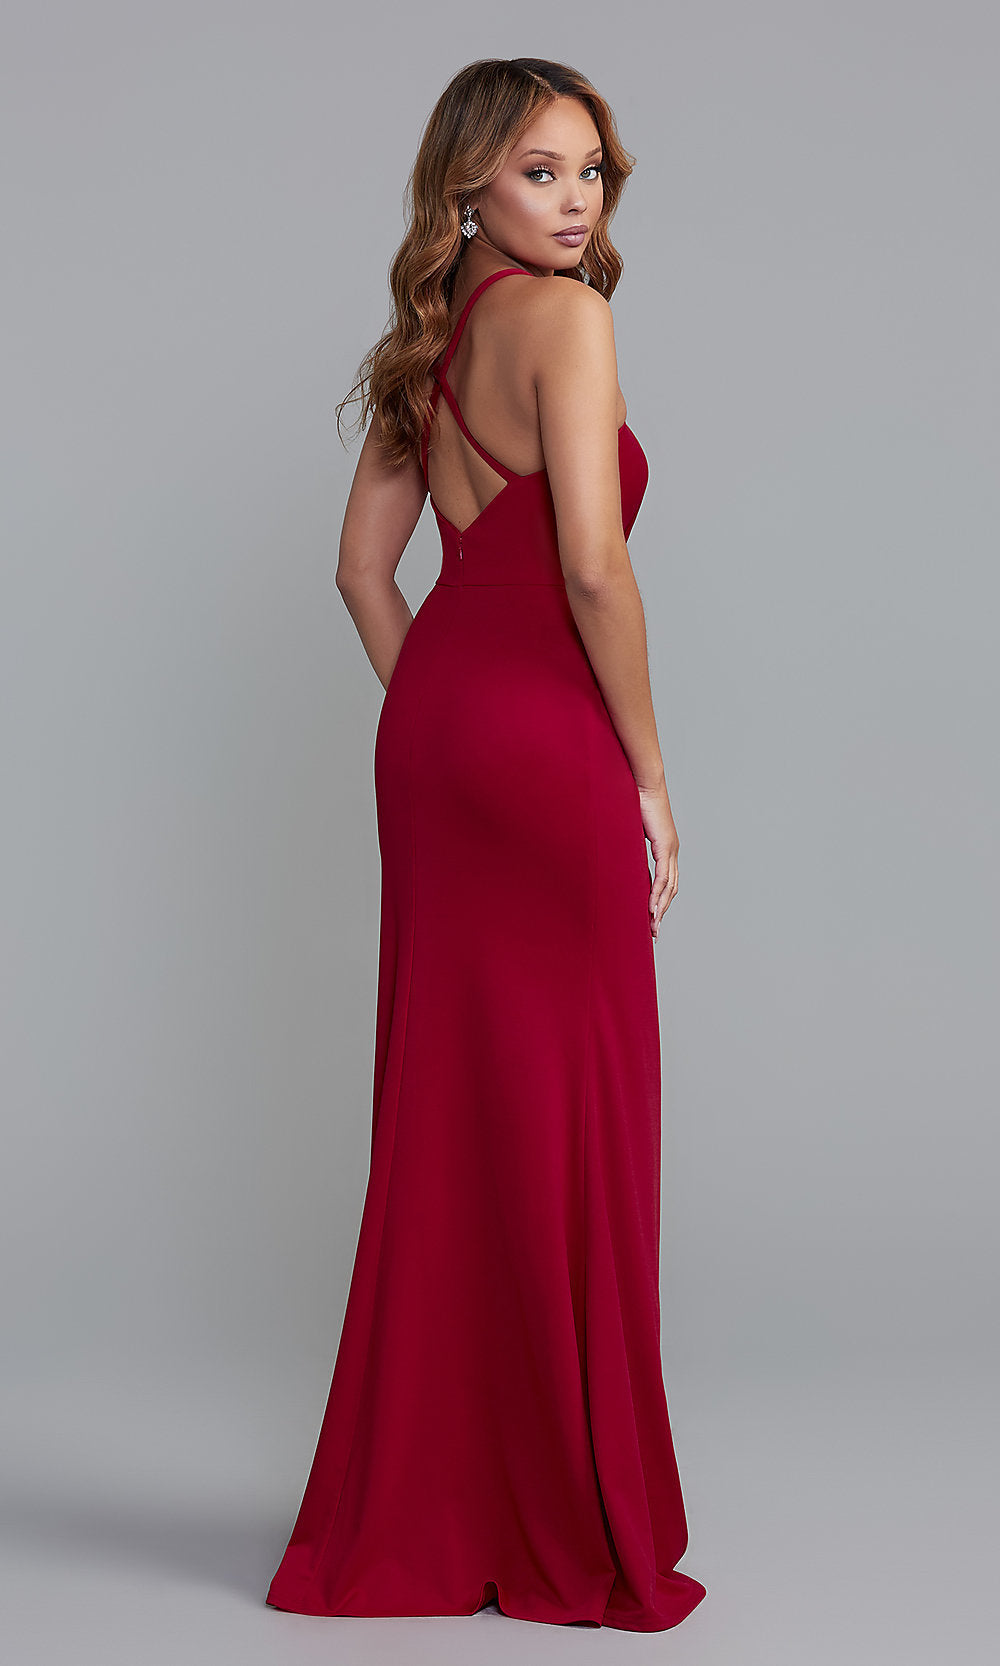 Drape-Front Simple Long Affordable Prom Dress-PromGirl